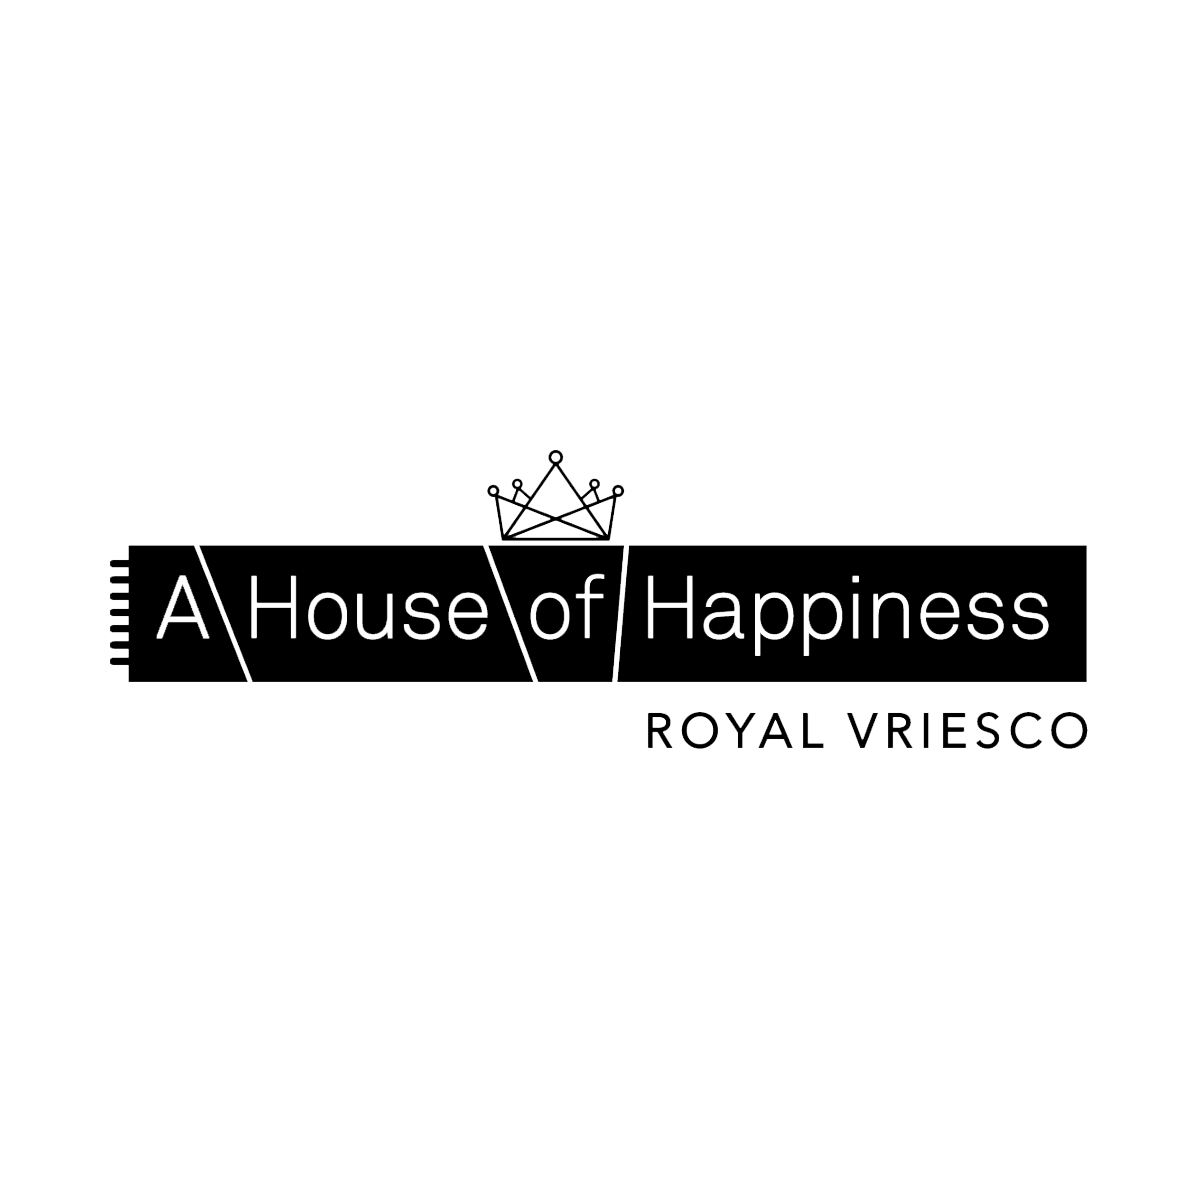 House of happiness